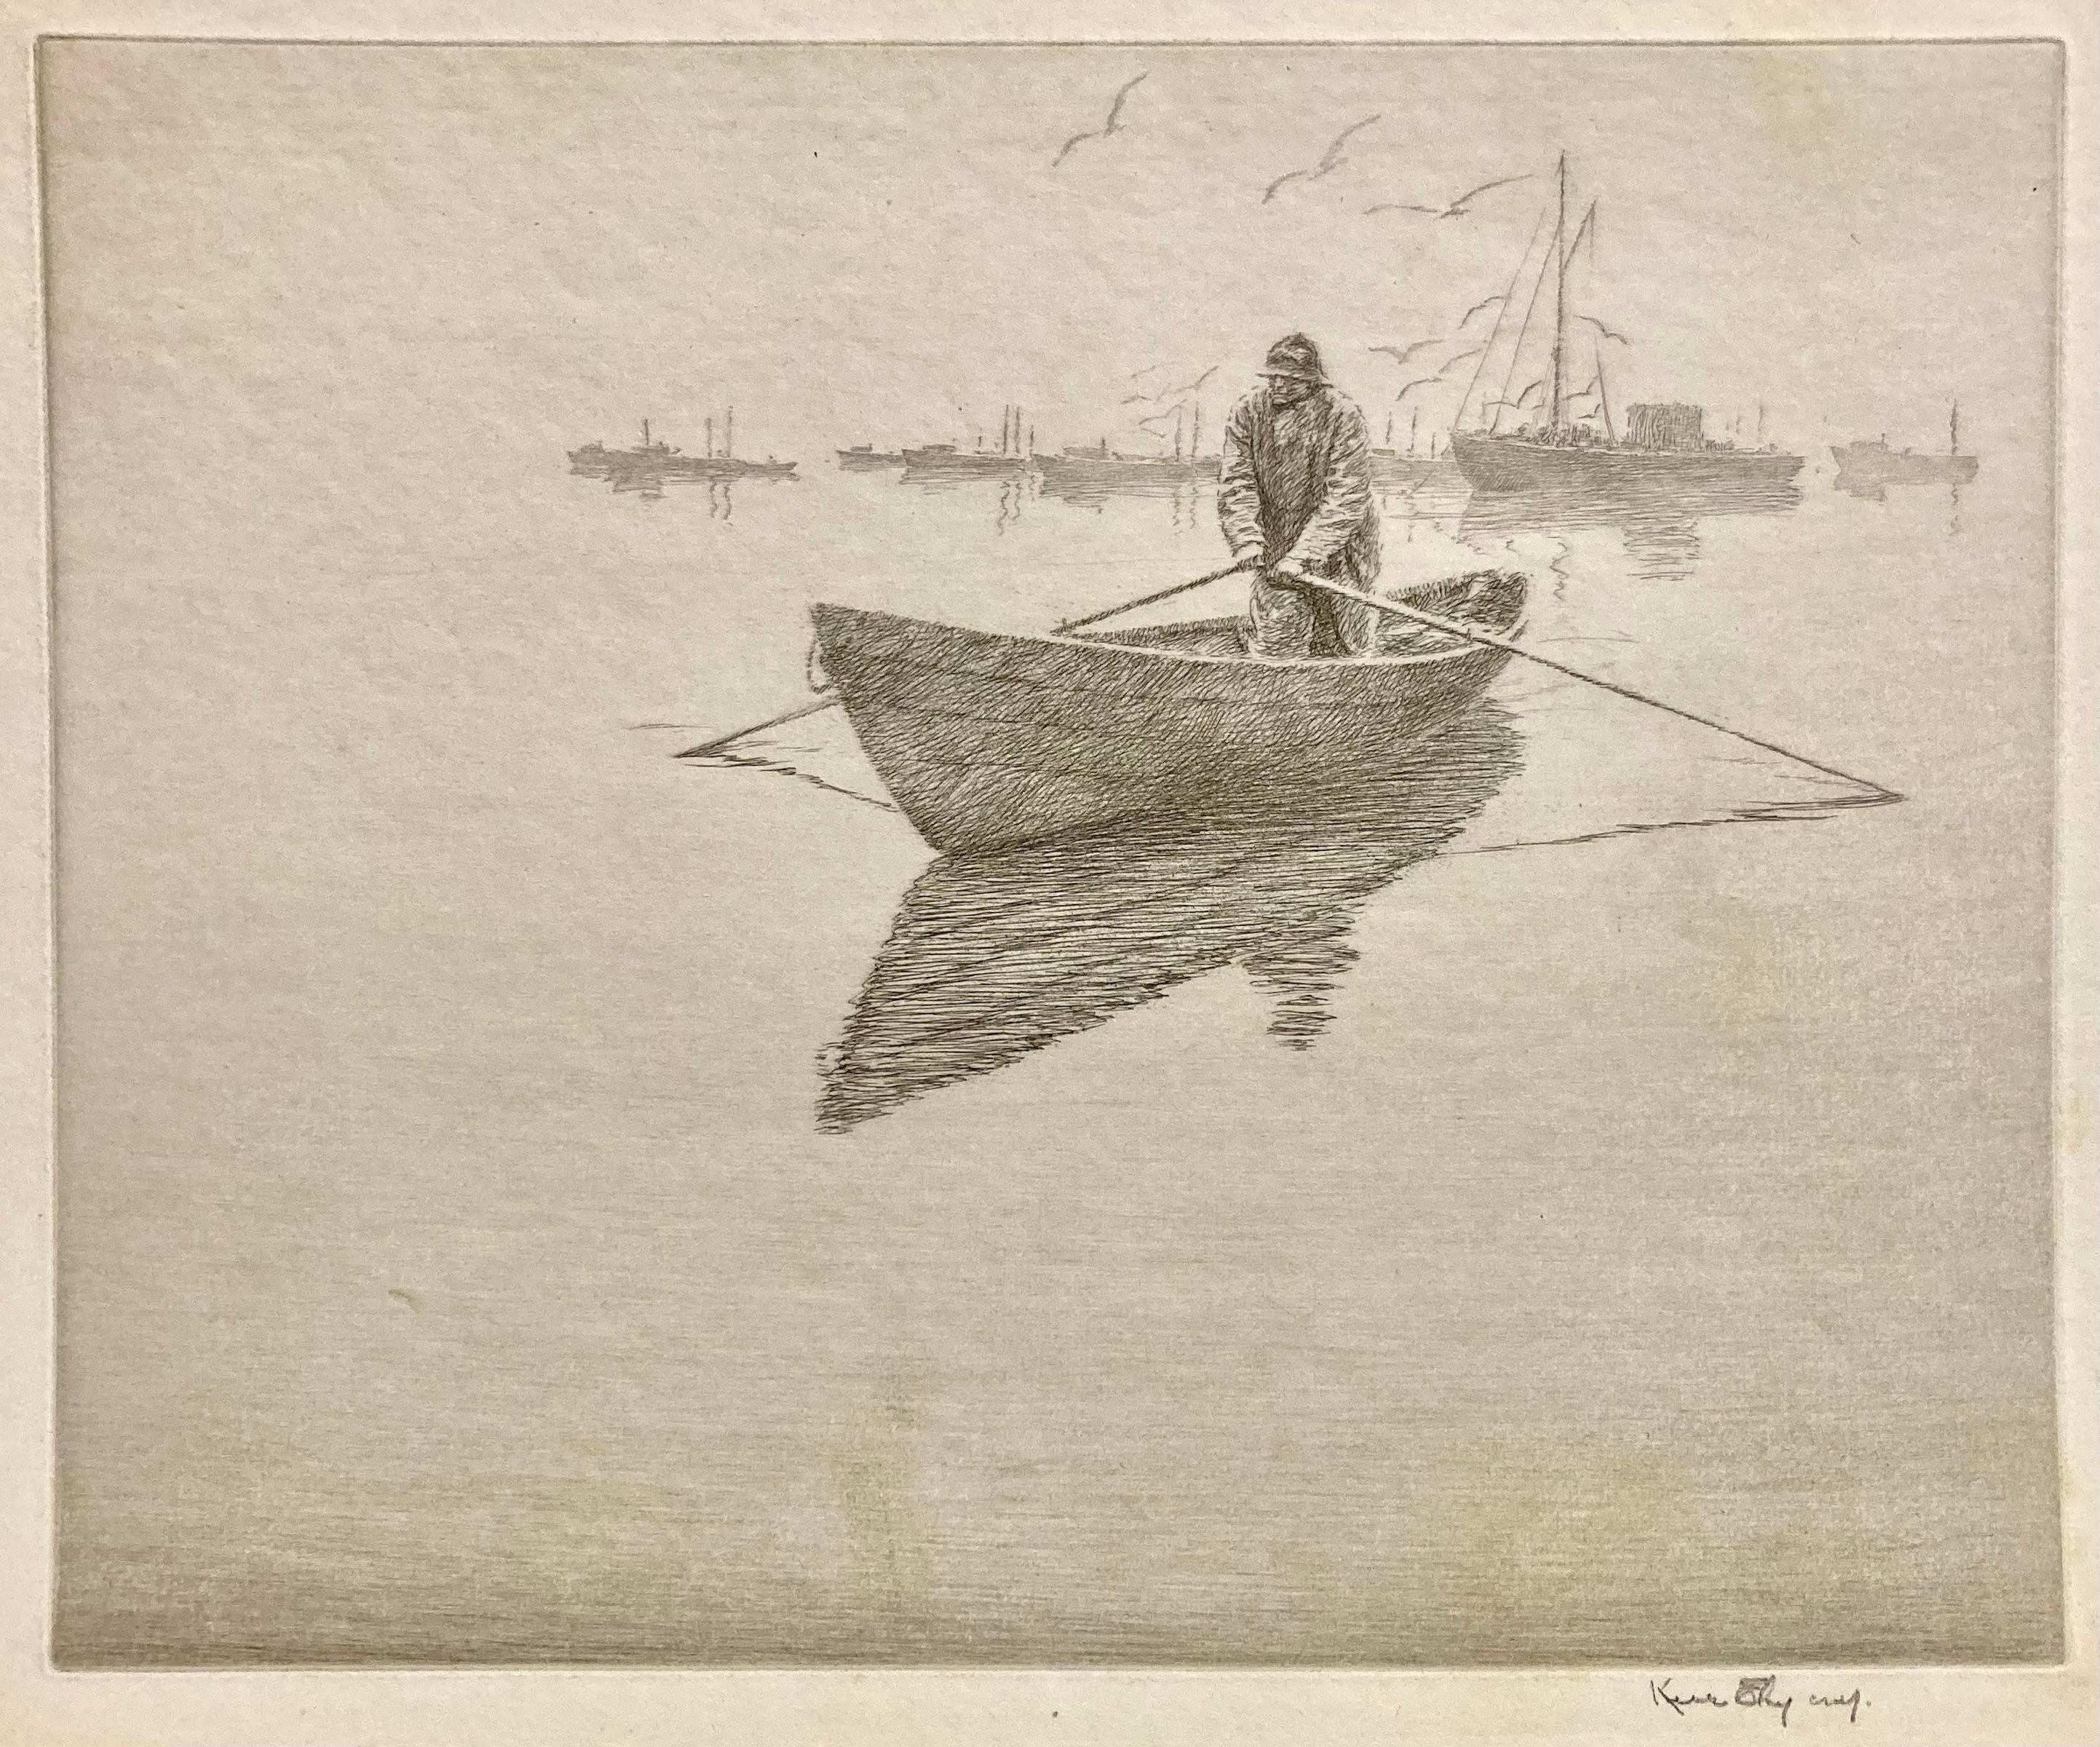 Although the title 'Lobster Fleet' calls to mind numerous vessels at sea in a single spot (and there's a group in the distance), in fact the print features a lone fisherman in a small row boat. Wearing protective gear, he is rowing to the pots; the